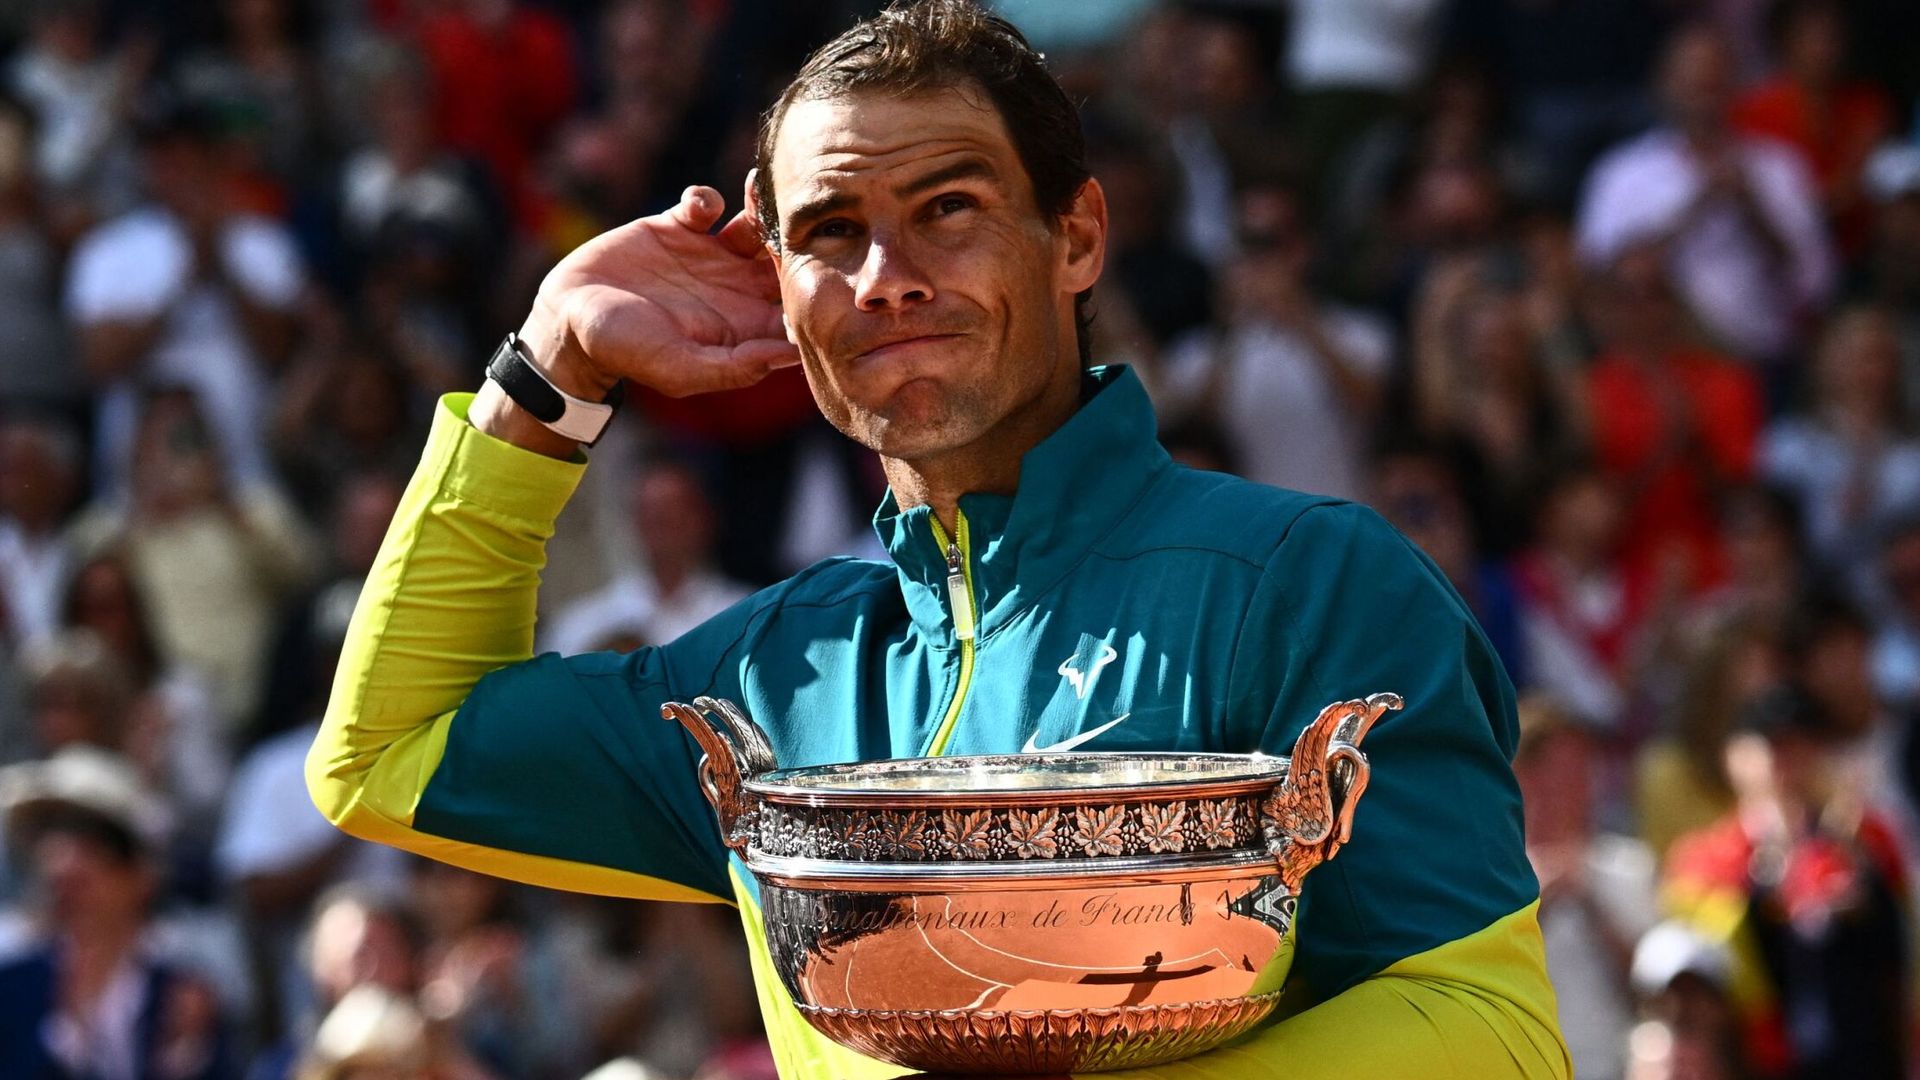 Nadal wins record-extending 14th French Open and 22nd Grand Slam